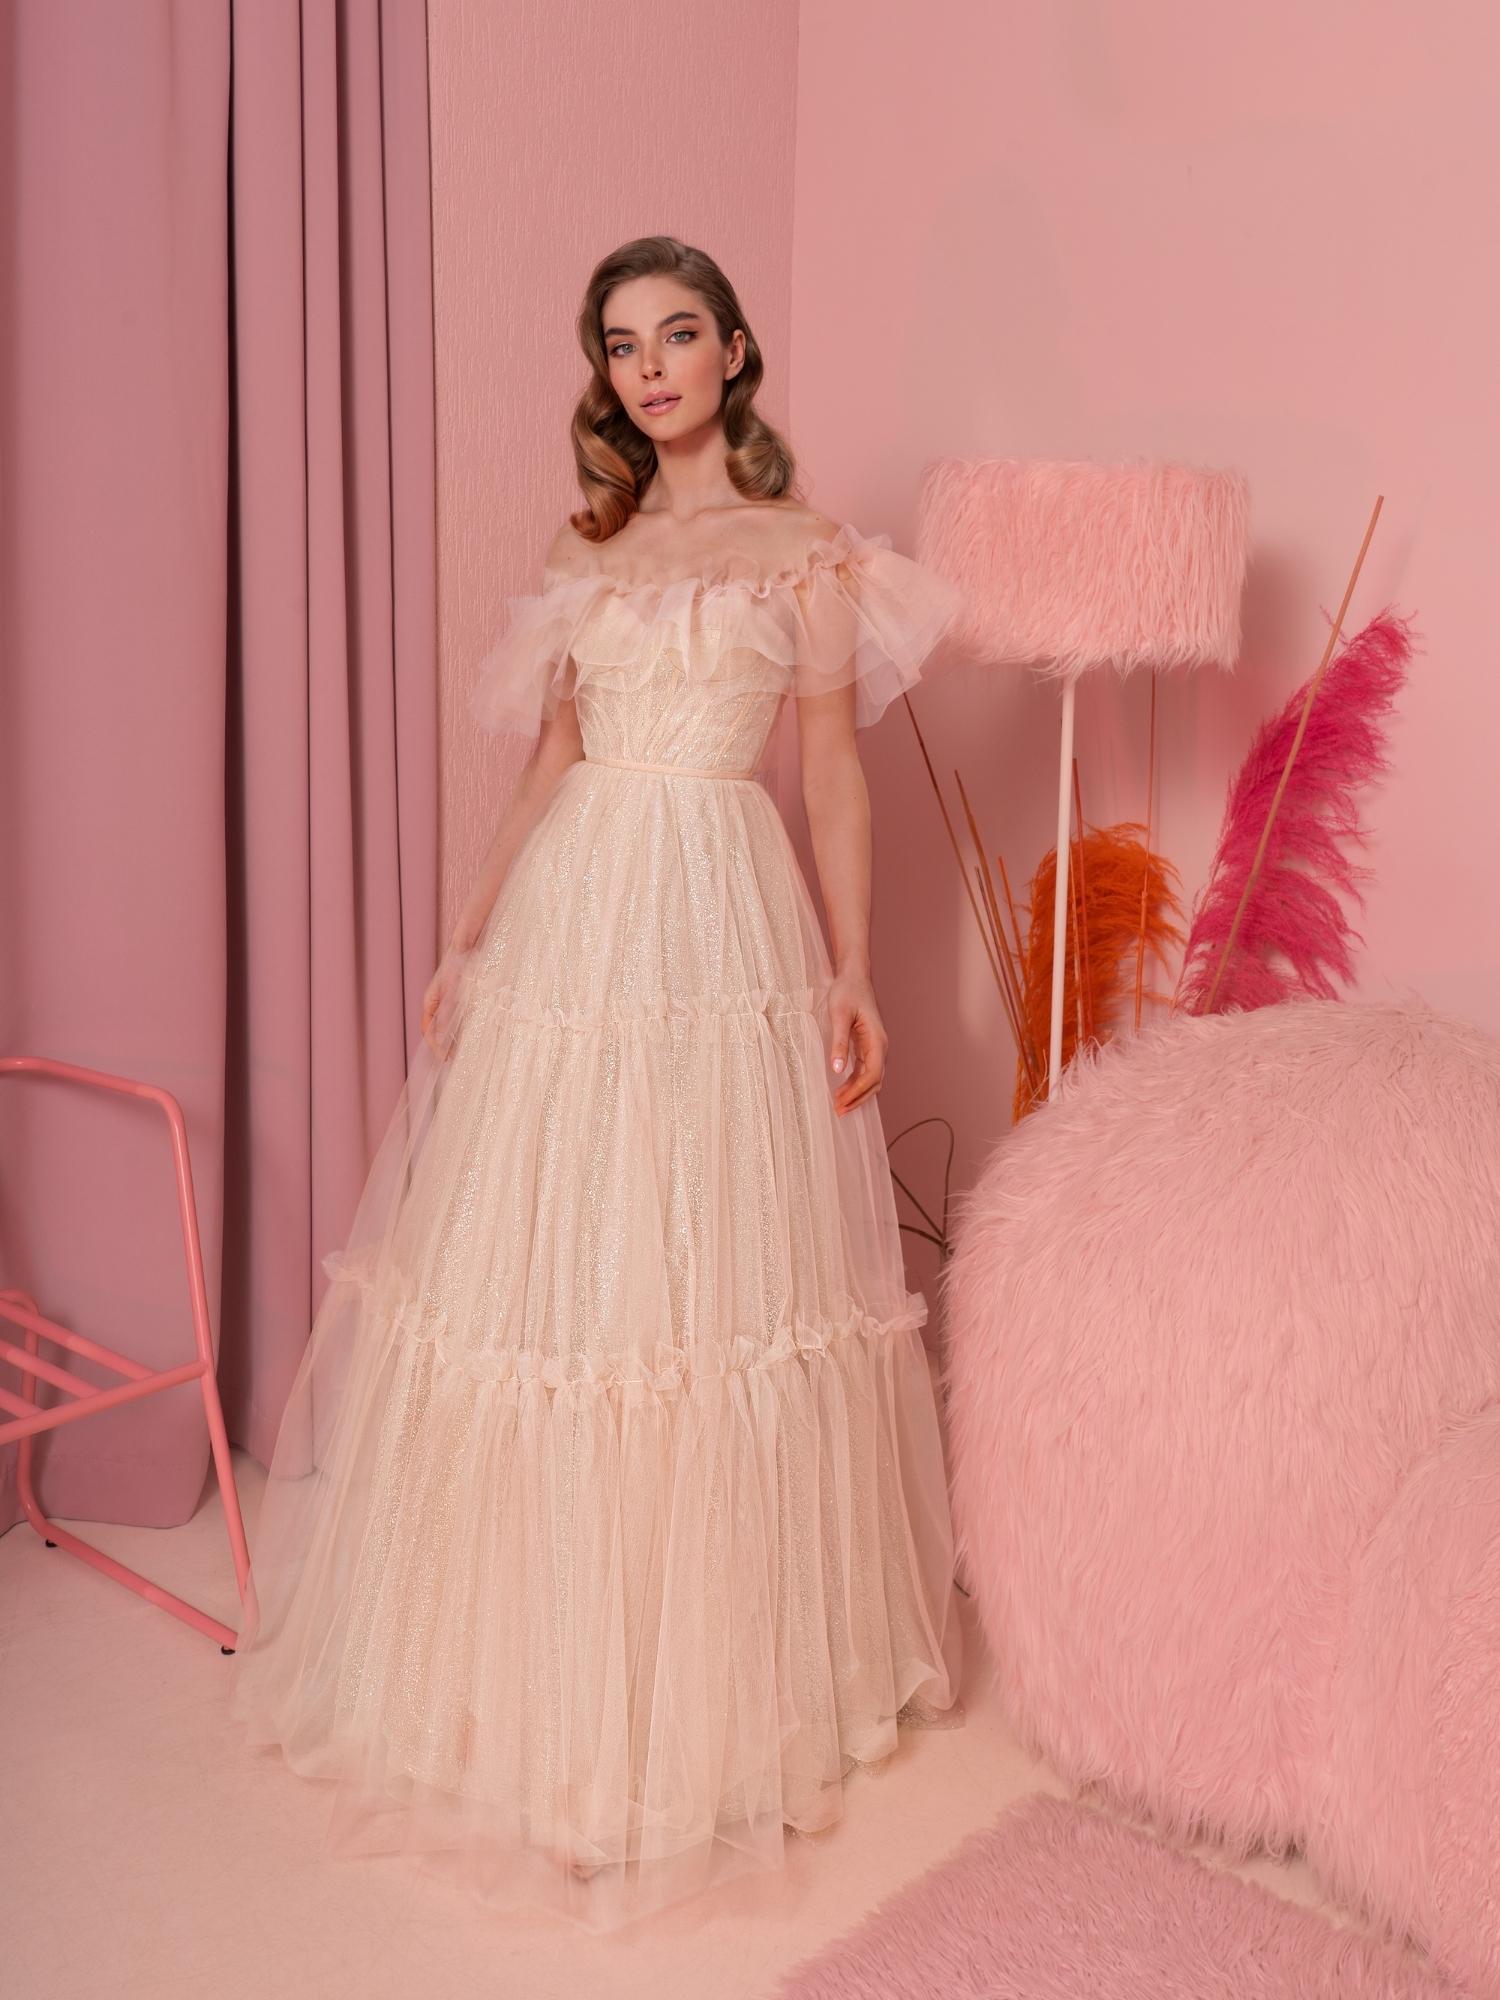 Ballgown with ruffled off-the-shoulder neckline and tiered skirt